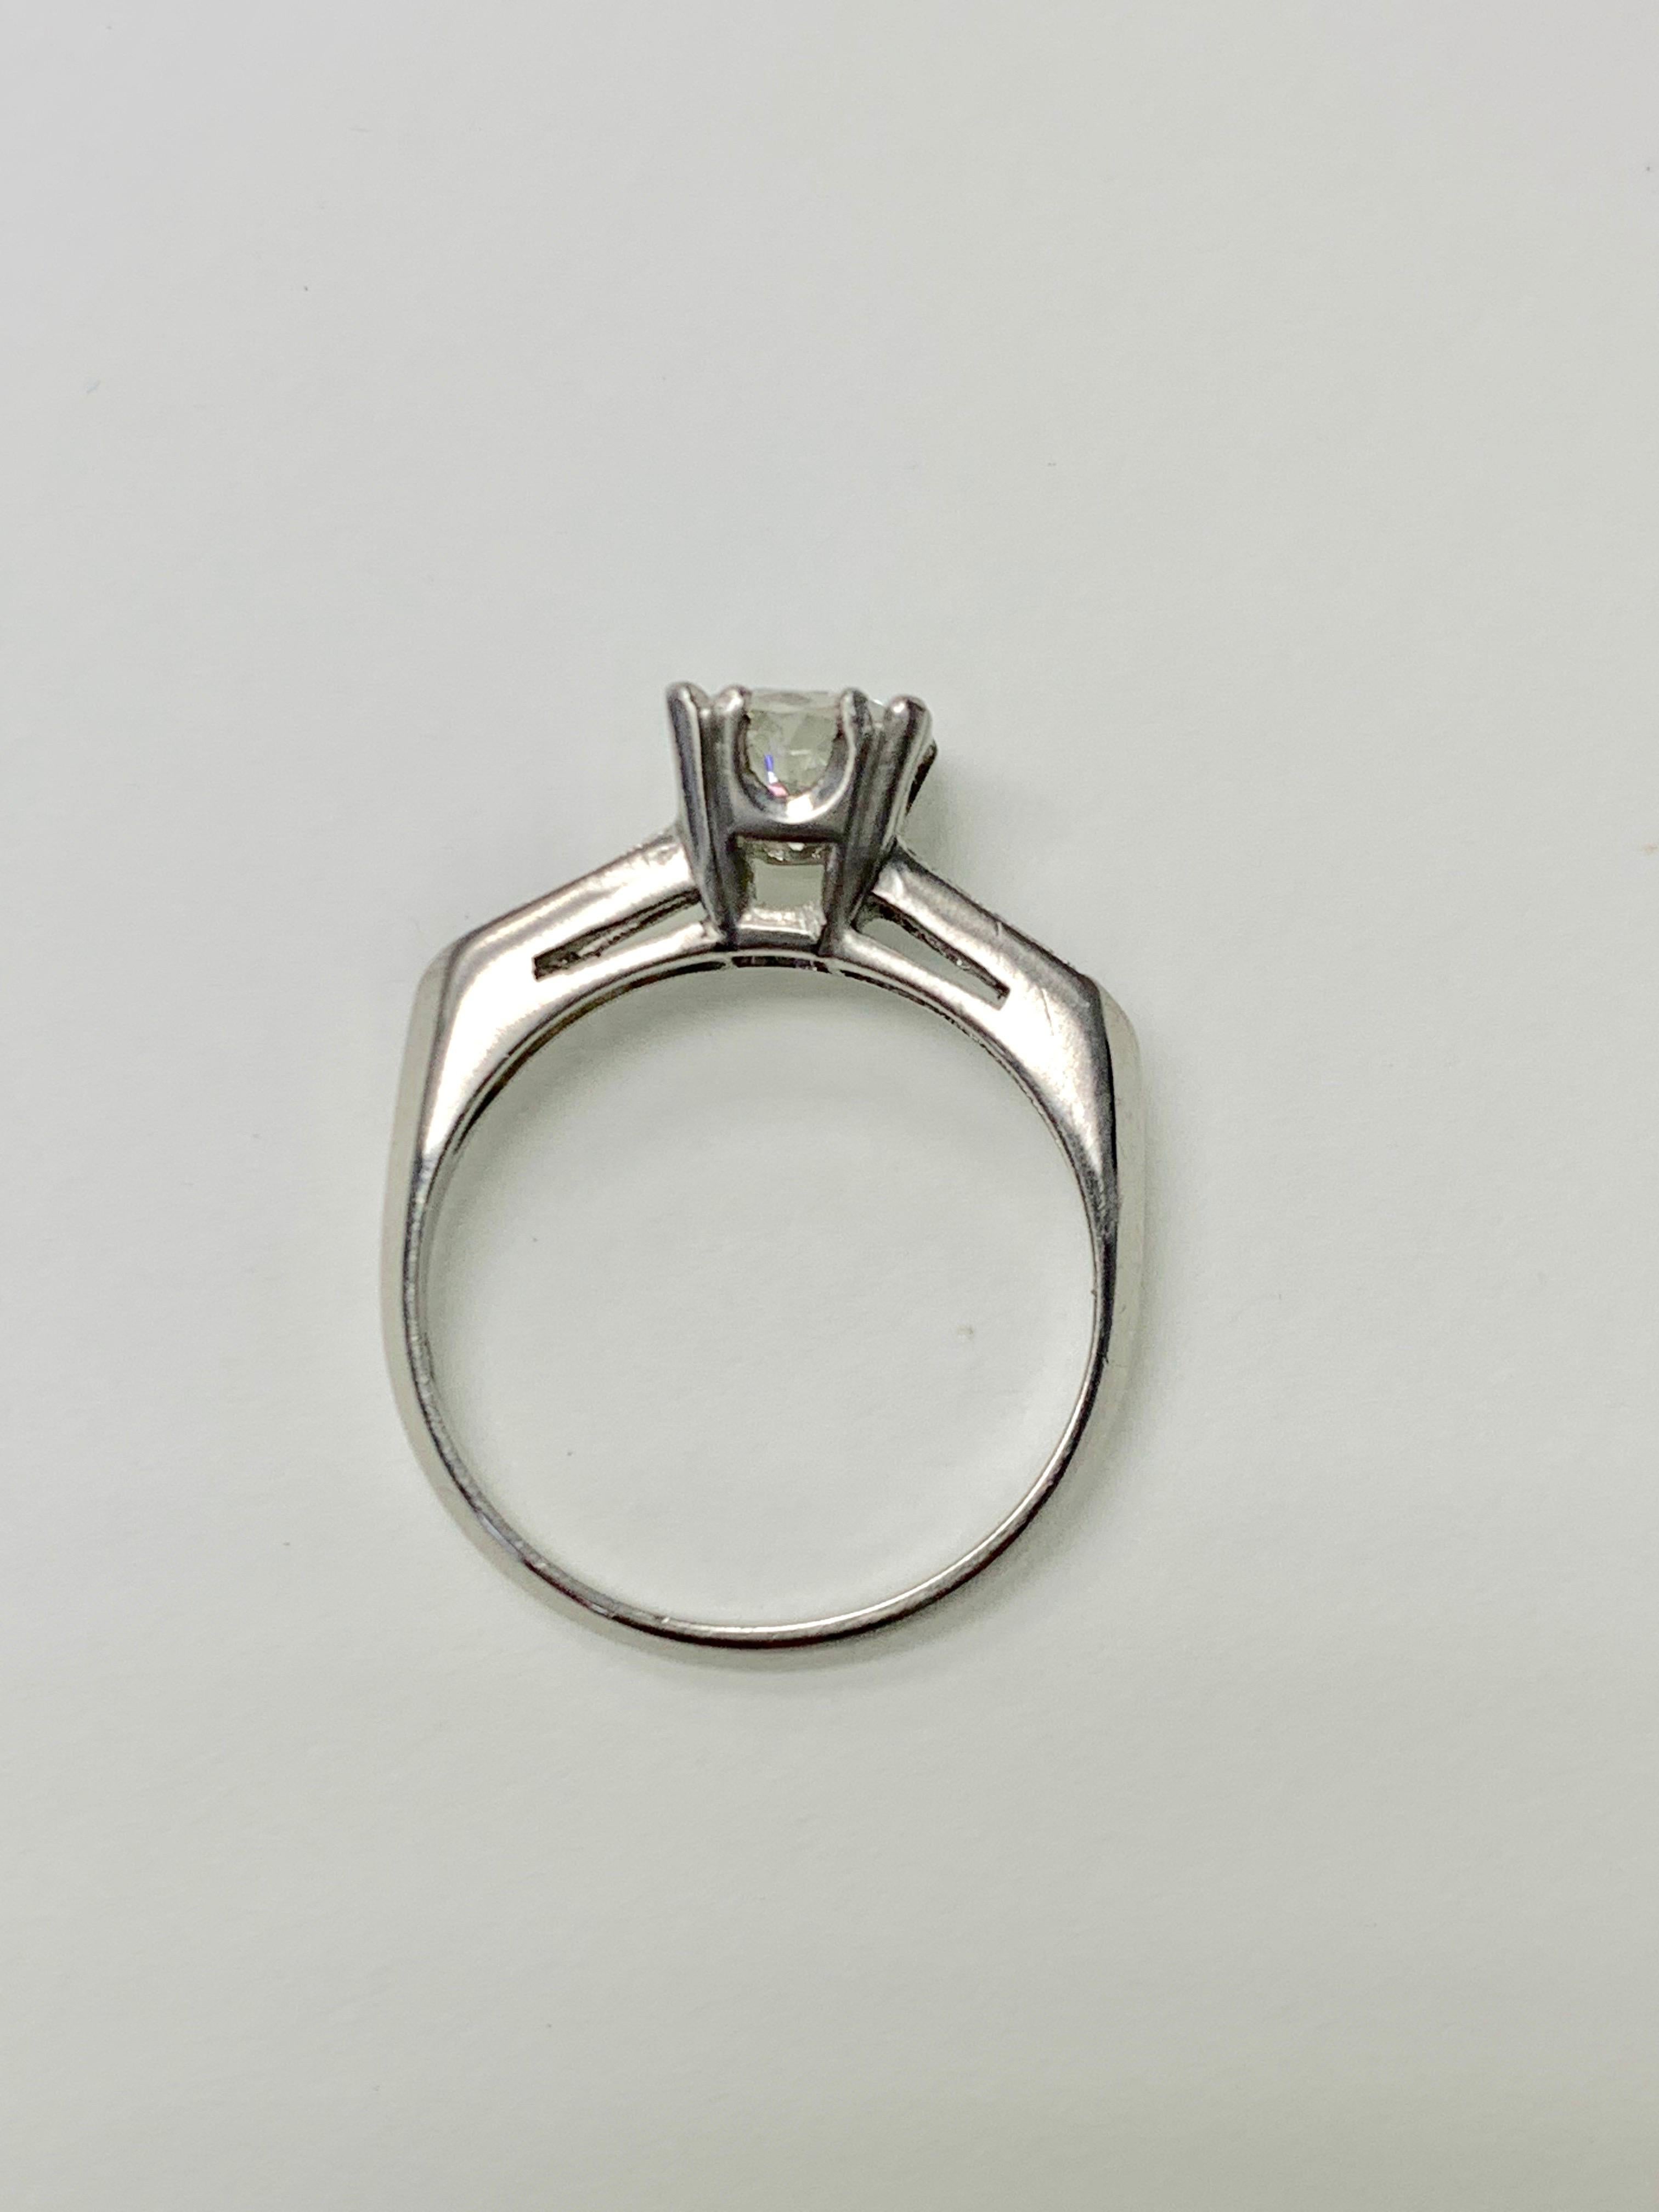 GIA Certified 1940 Old European Cut Diamond Engagement Ring in Platinum In Excellent Condition For Sale In New York, NY